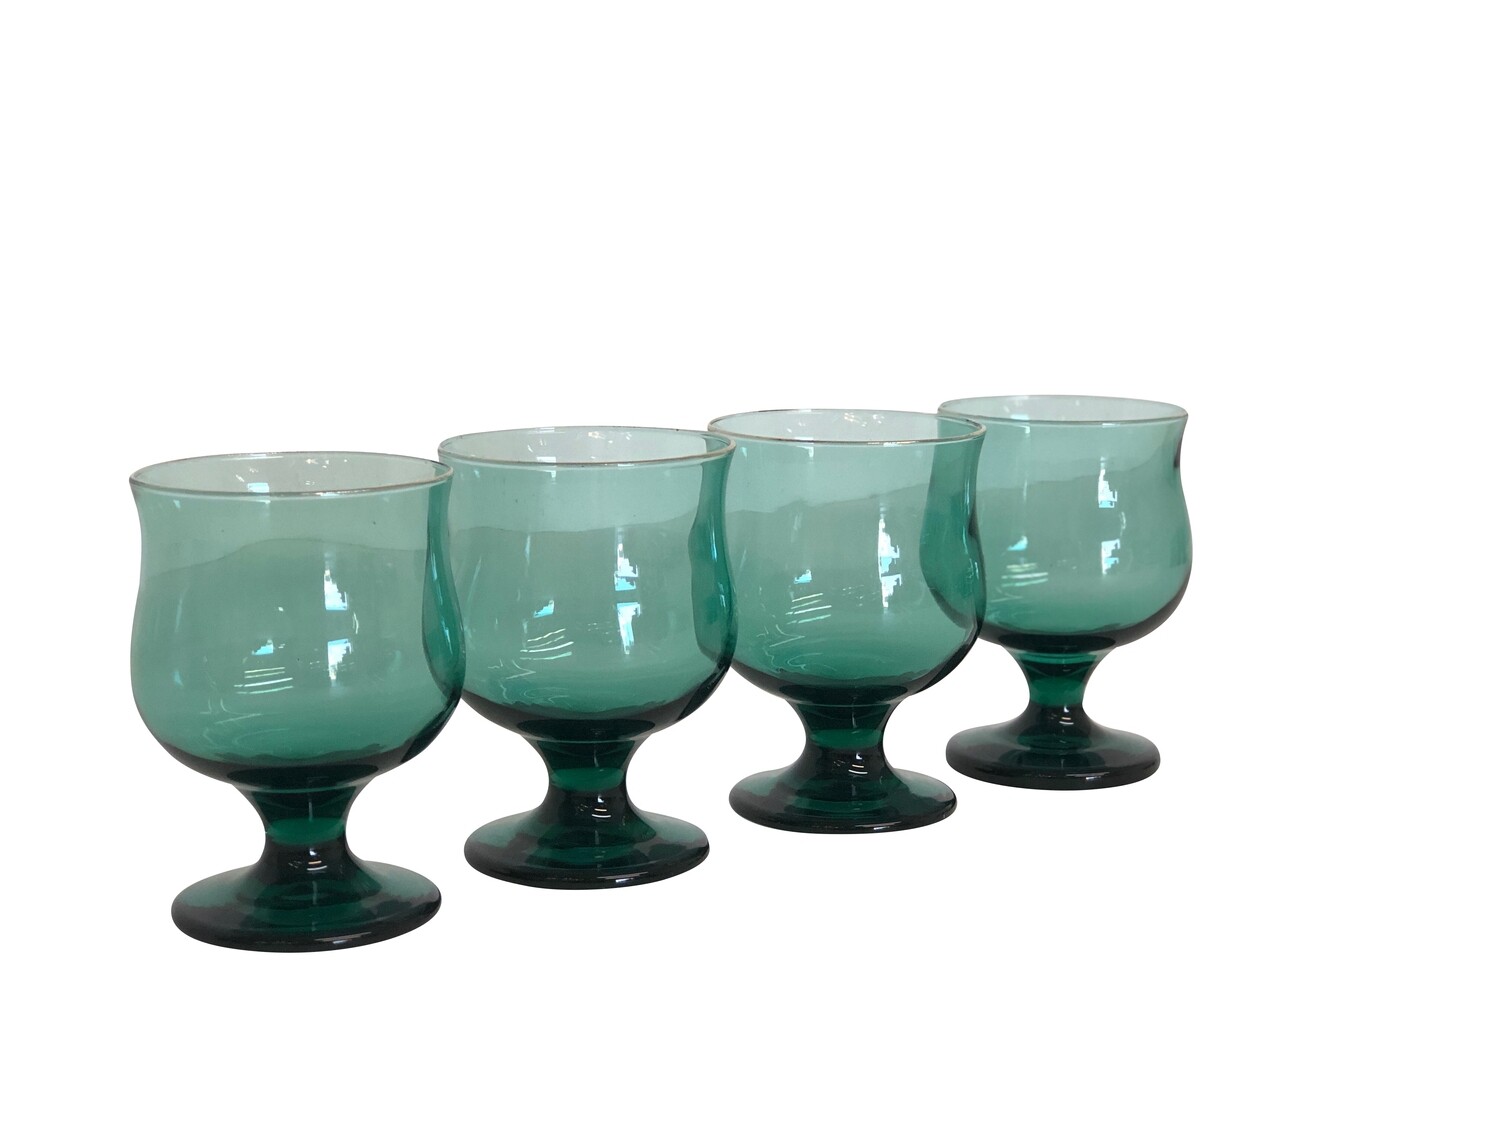 Mid Century Modern set of 4 Footed Glasses in Green with Gold Trim